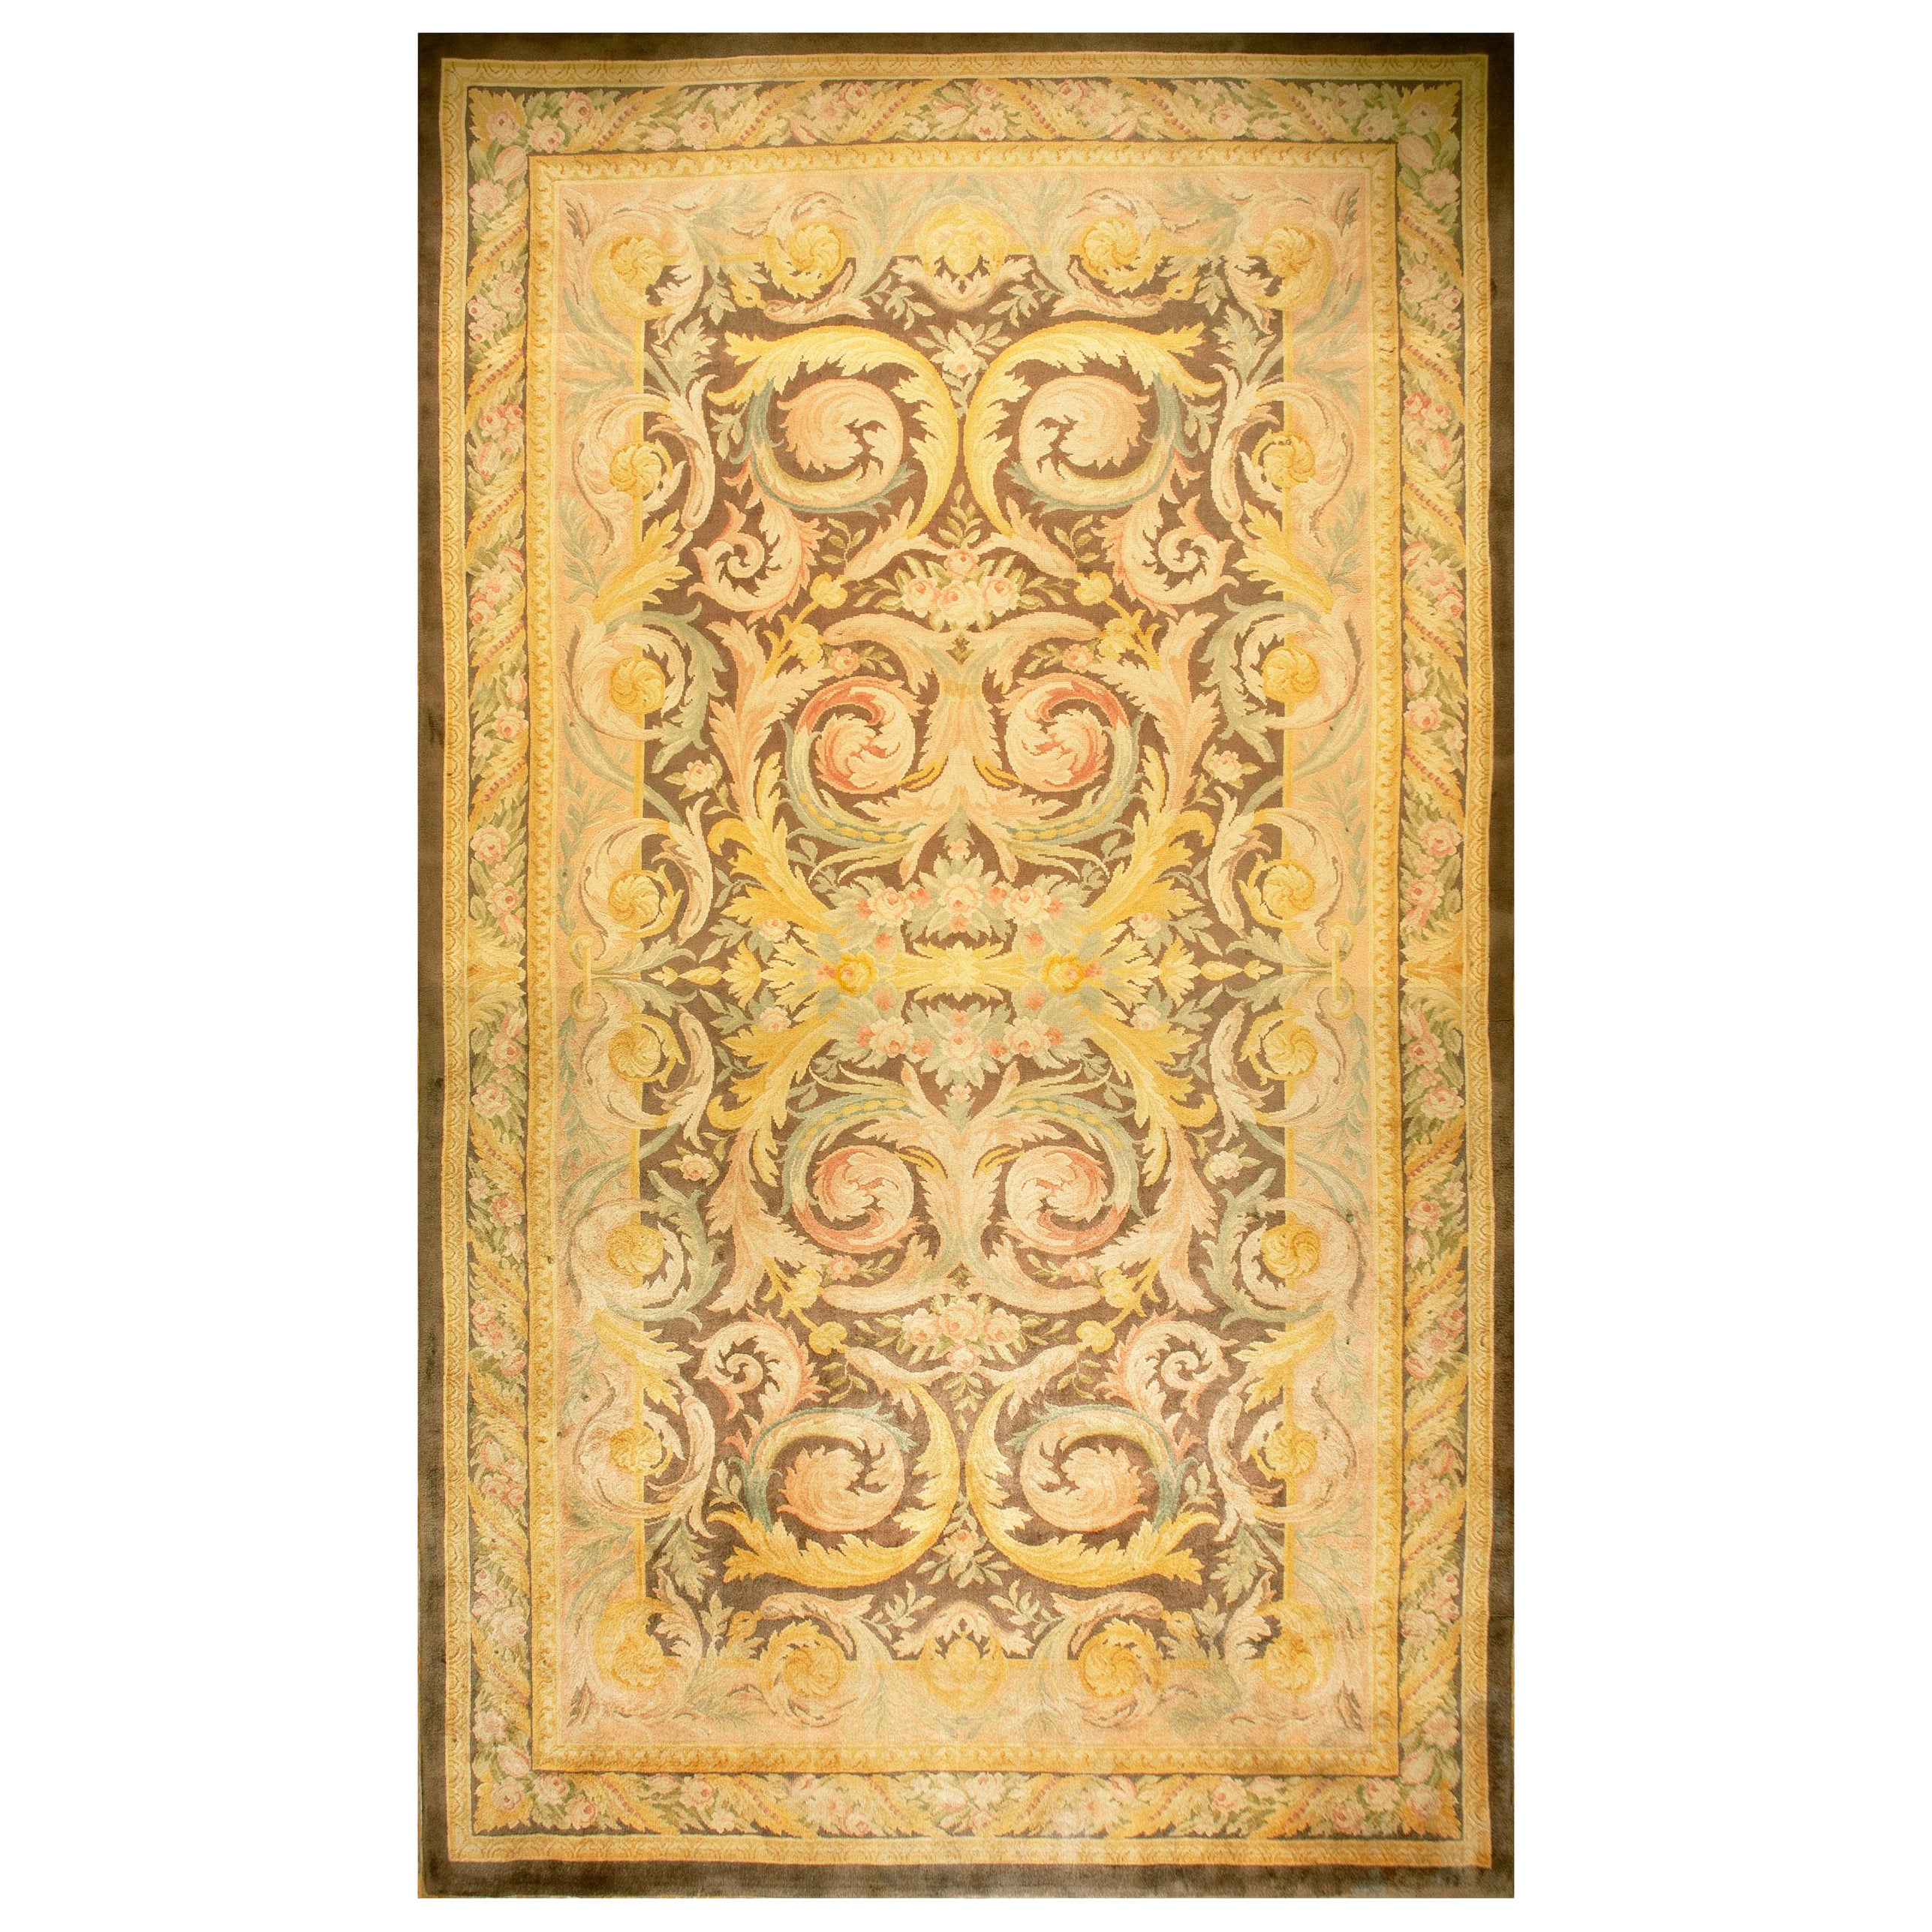 Early 20th Century French Savonnerie Carpet For Sale